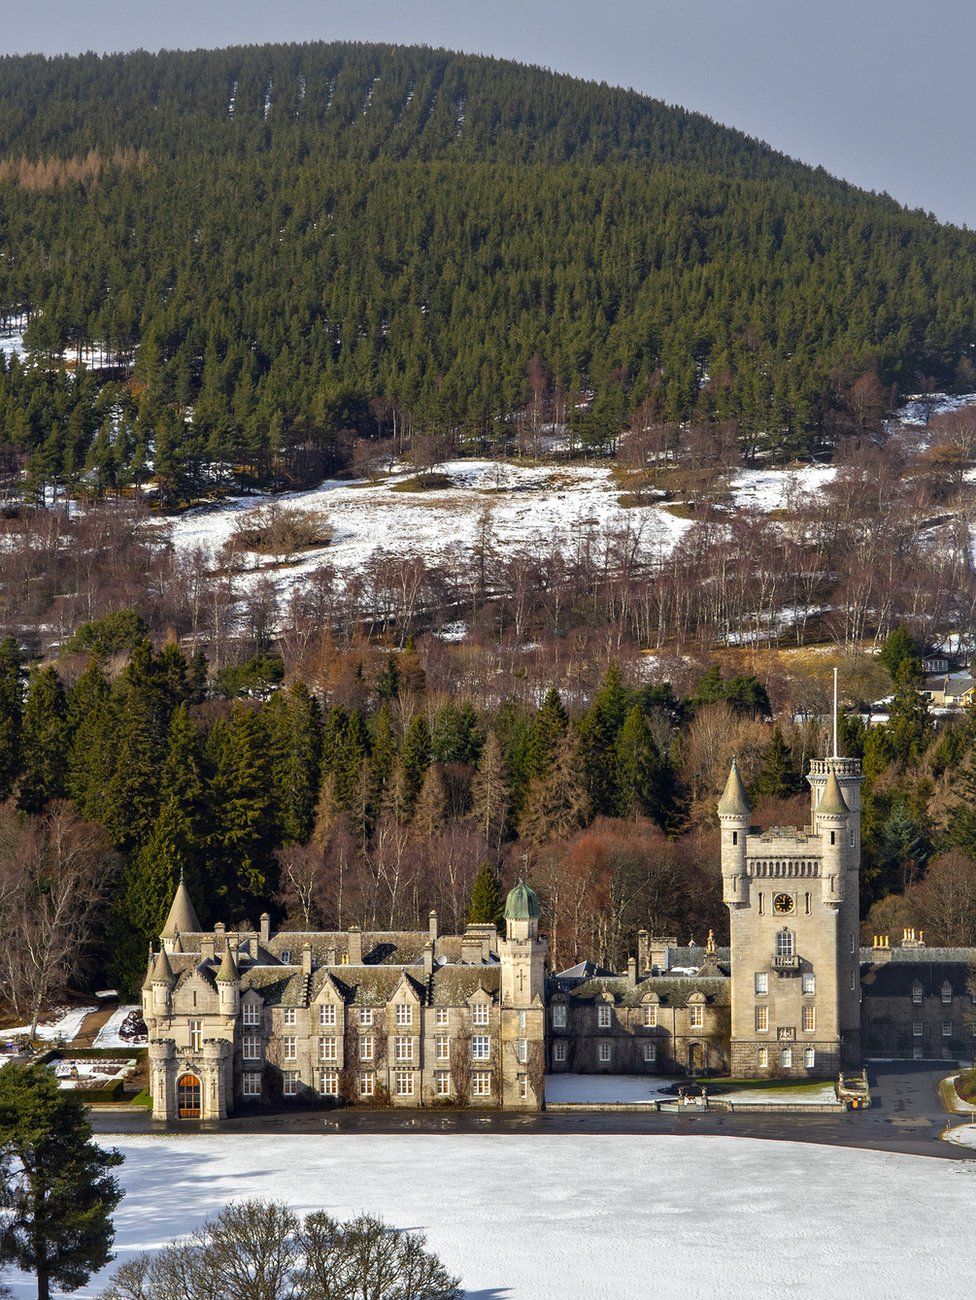 Michael Duguid took this photo of Balmoral Castle this week